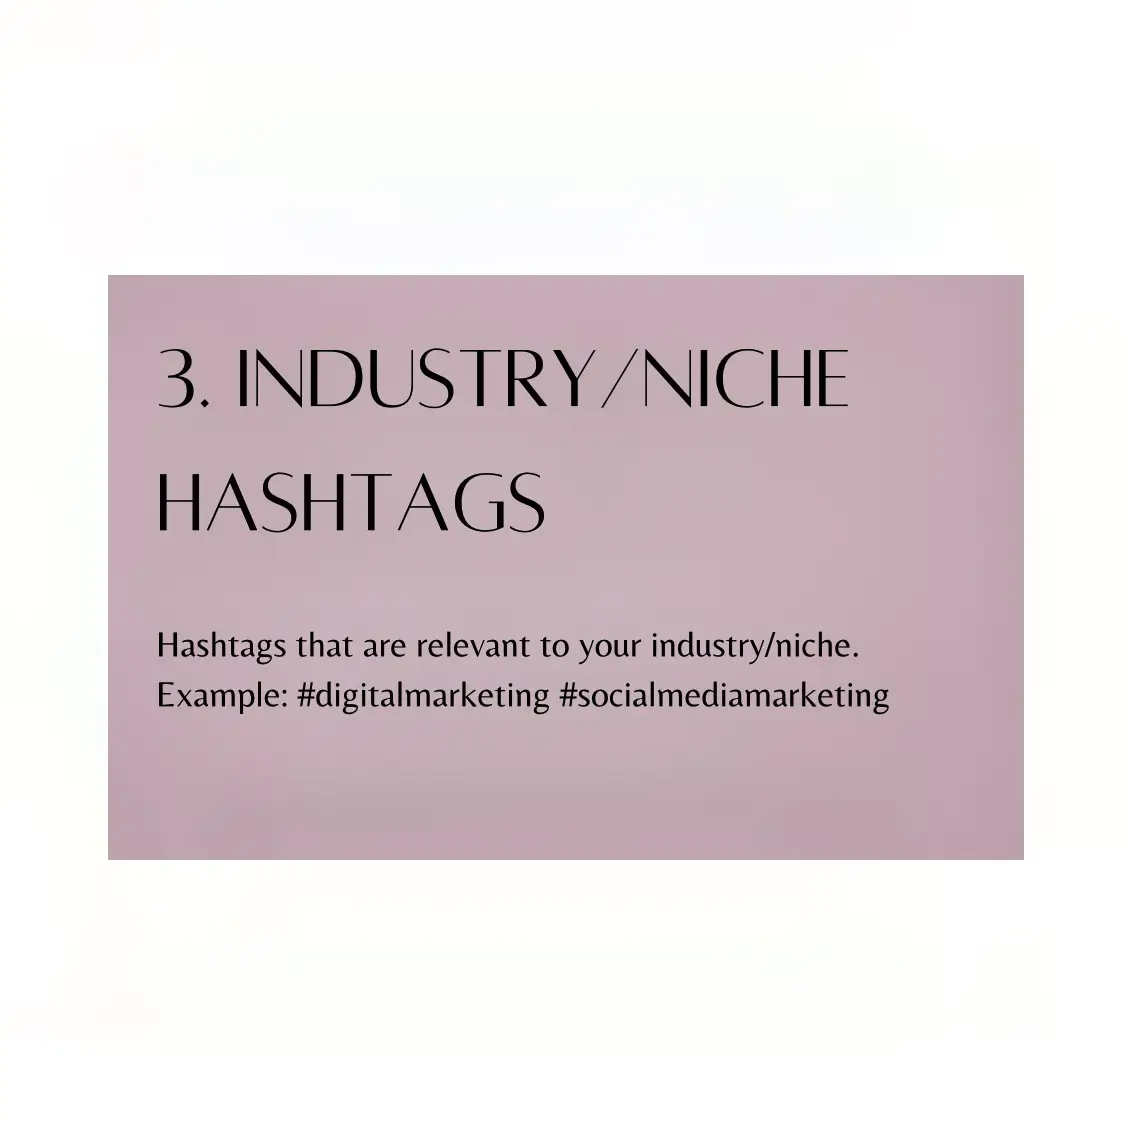  A list of hashtags that are relevant to your industry/niche.